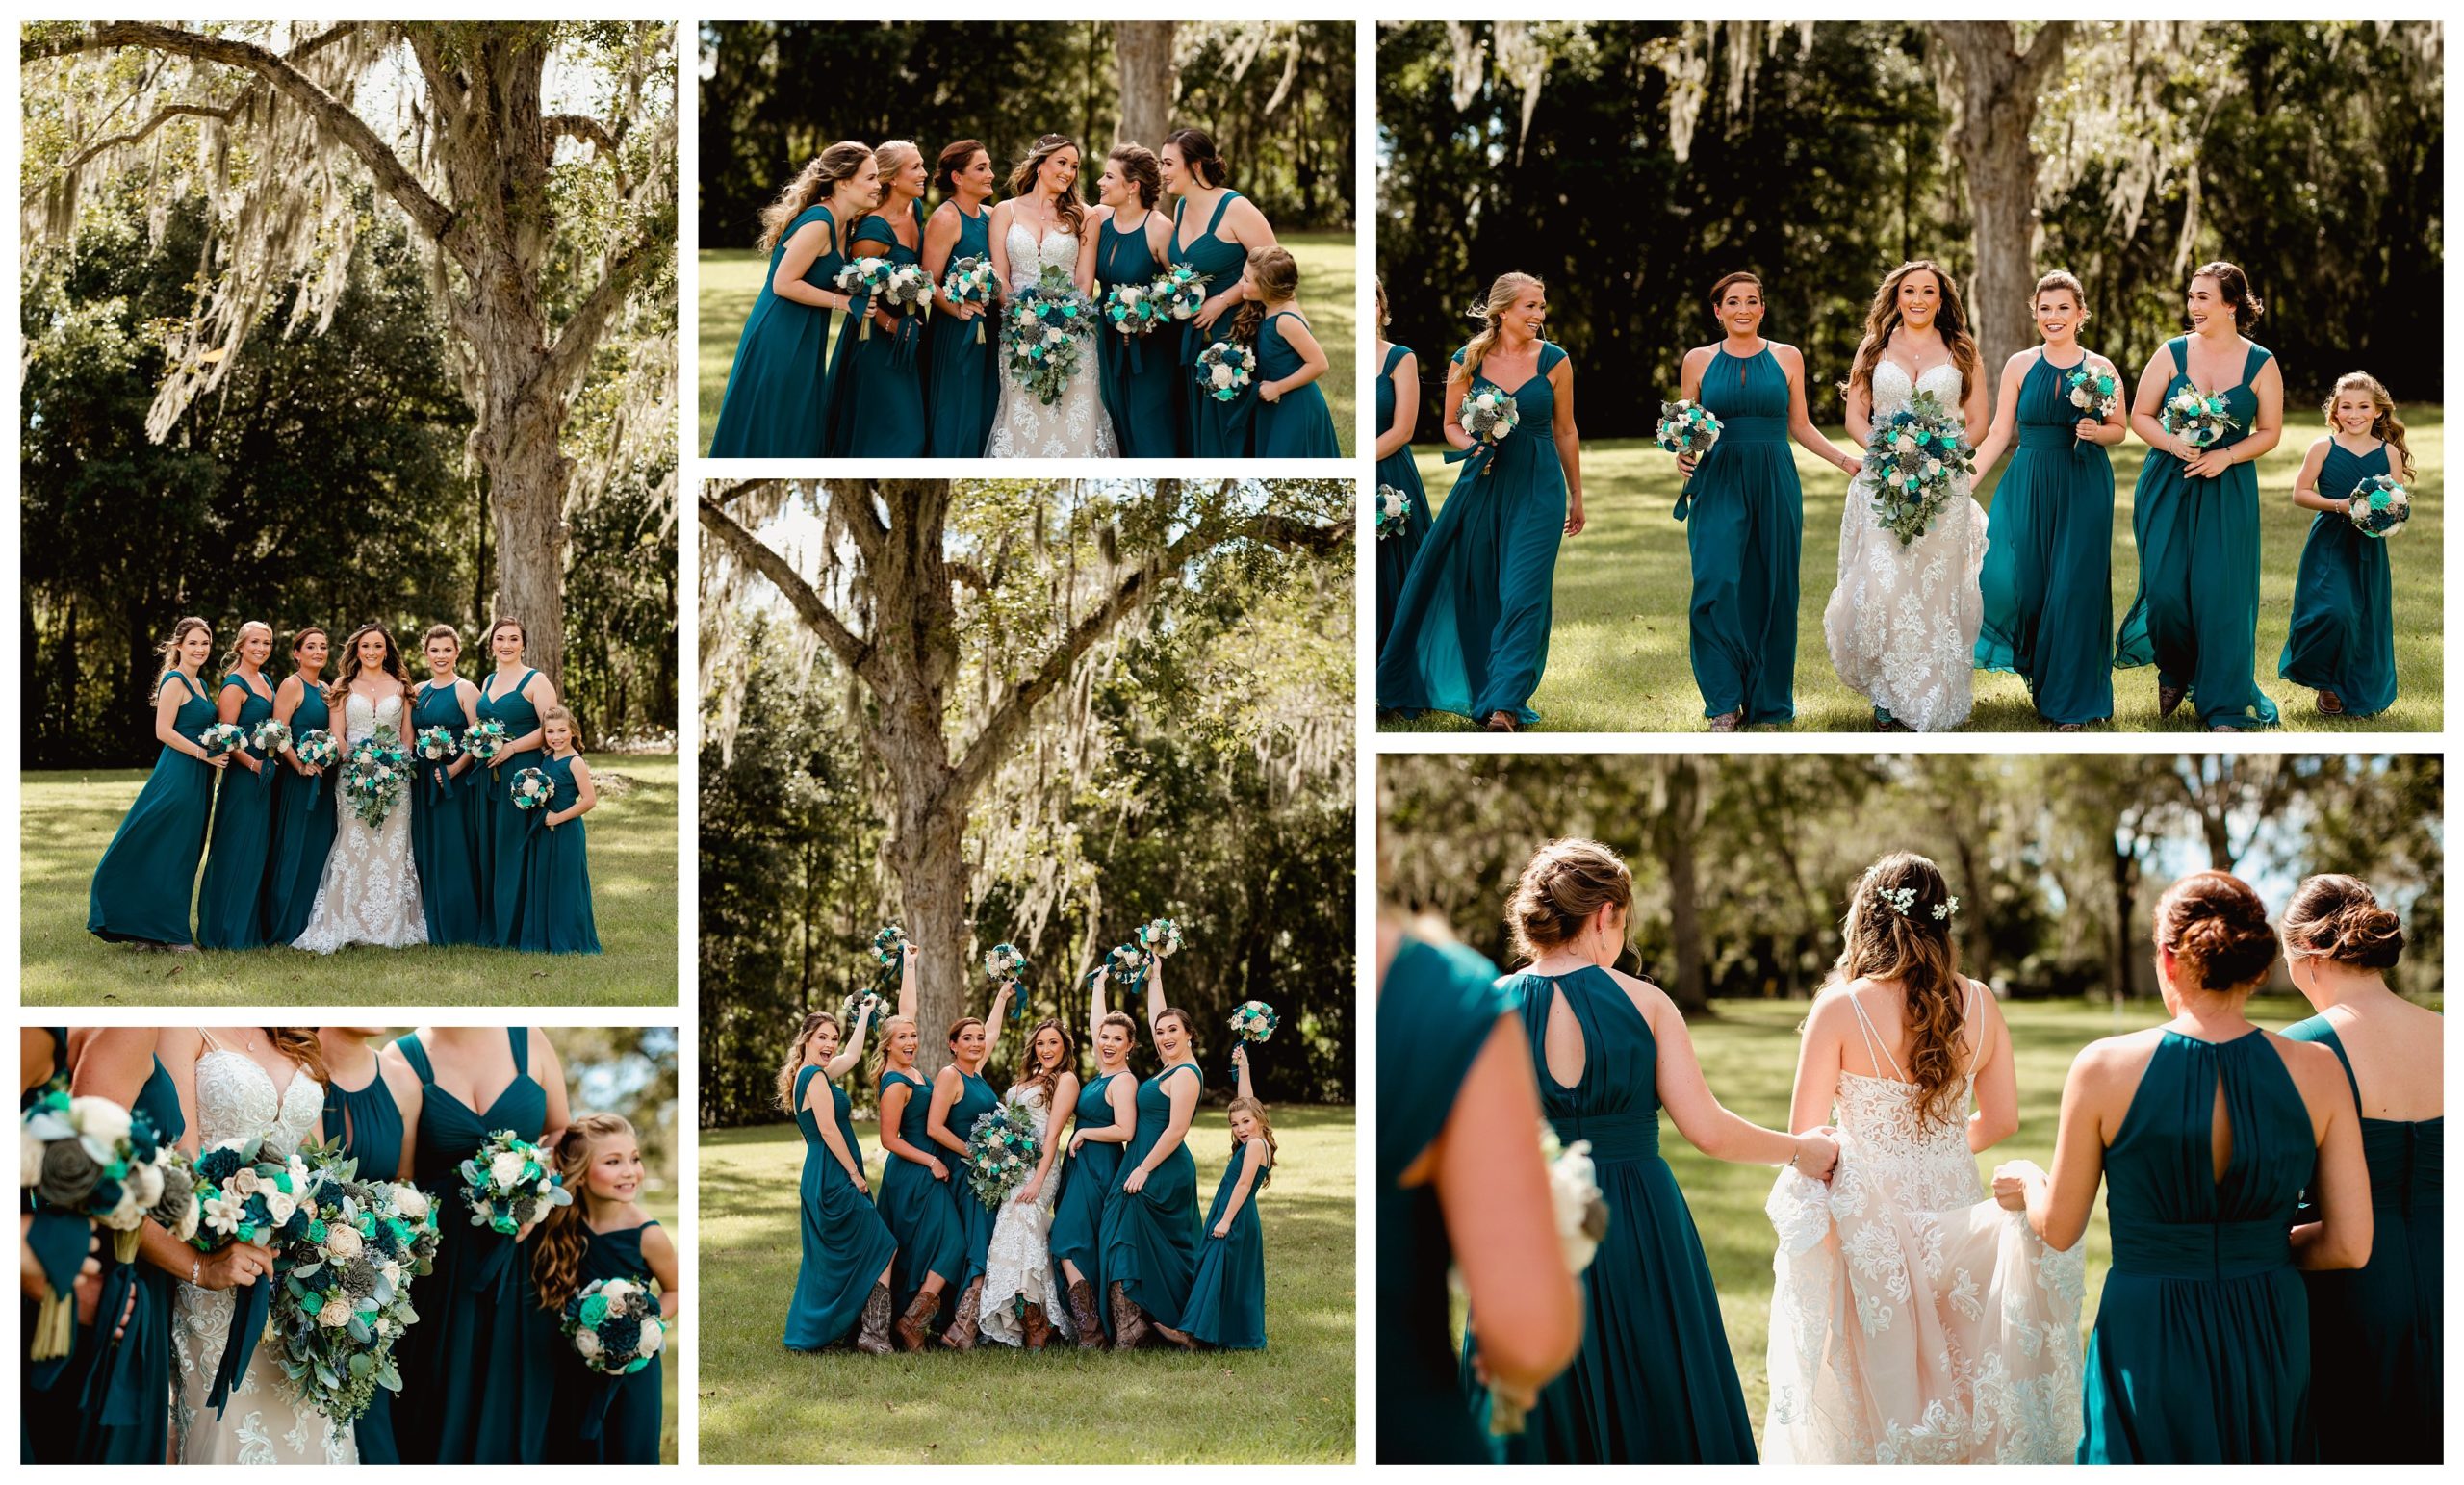 Bride and bridesmaids pictures taken outside at Clark Plantation.